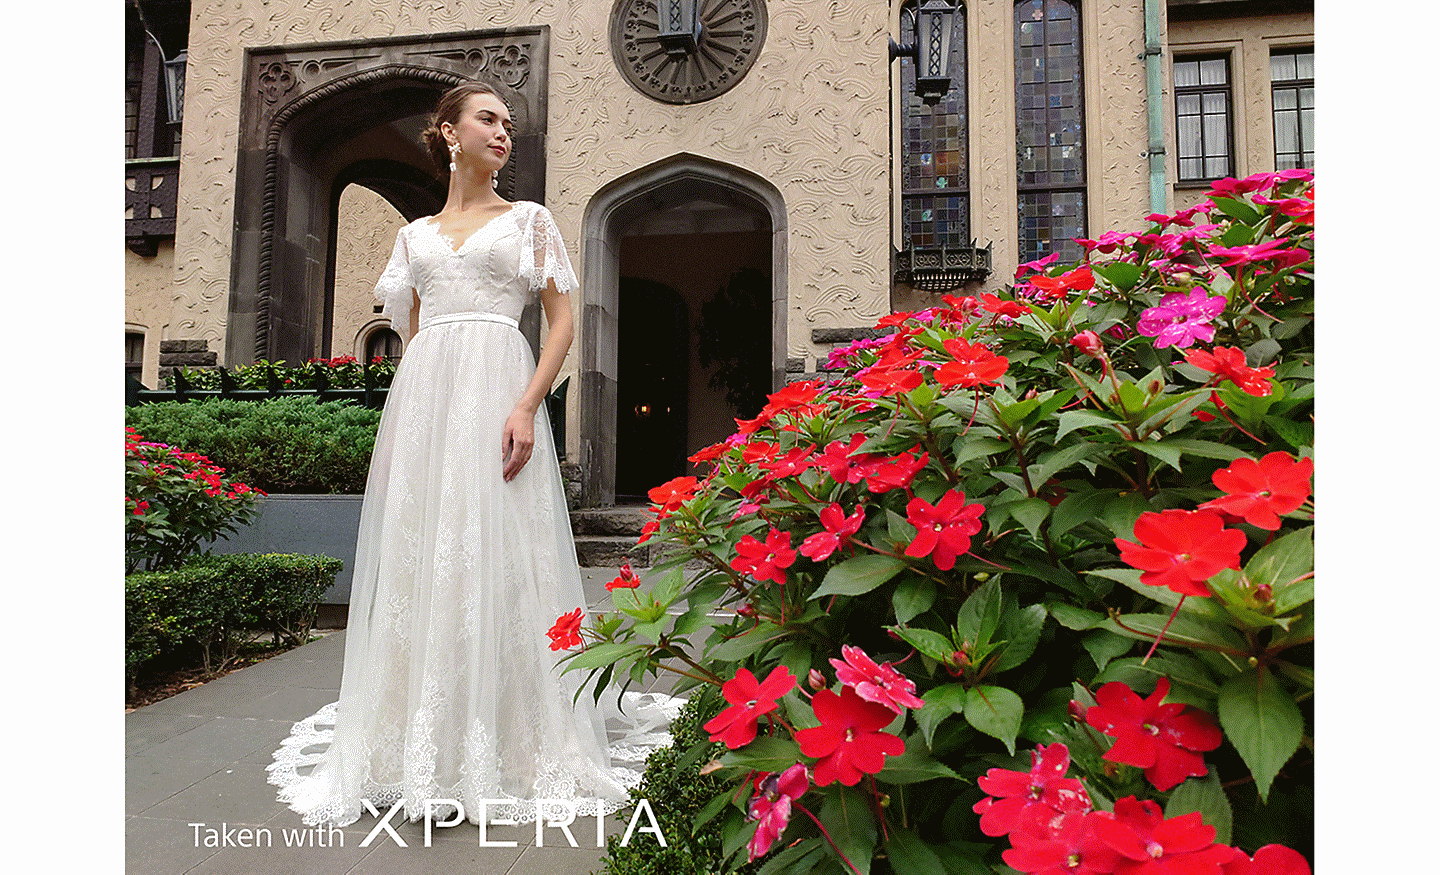 A bride posing outside a building with red flowers in the foreground. Text reads "Taken with XPERIA".